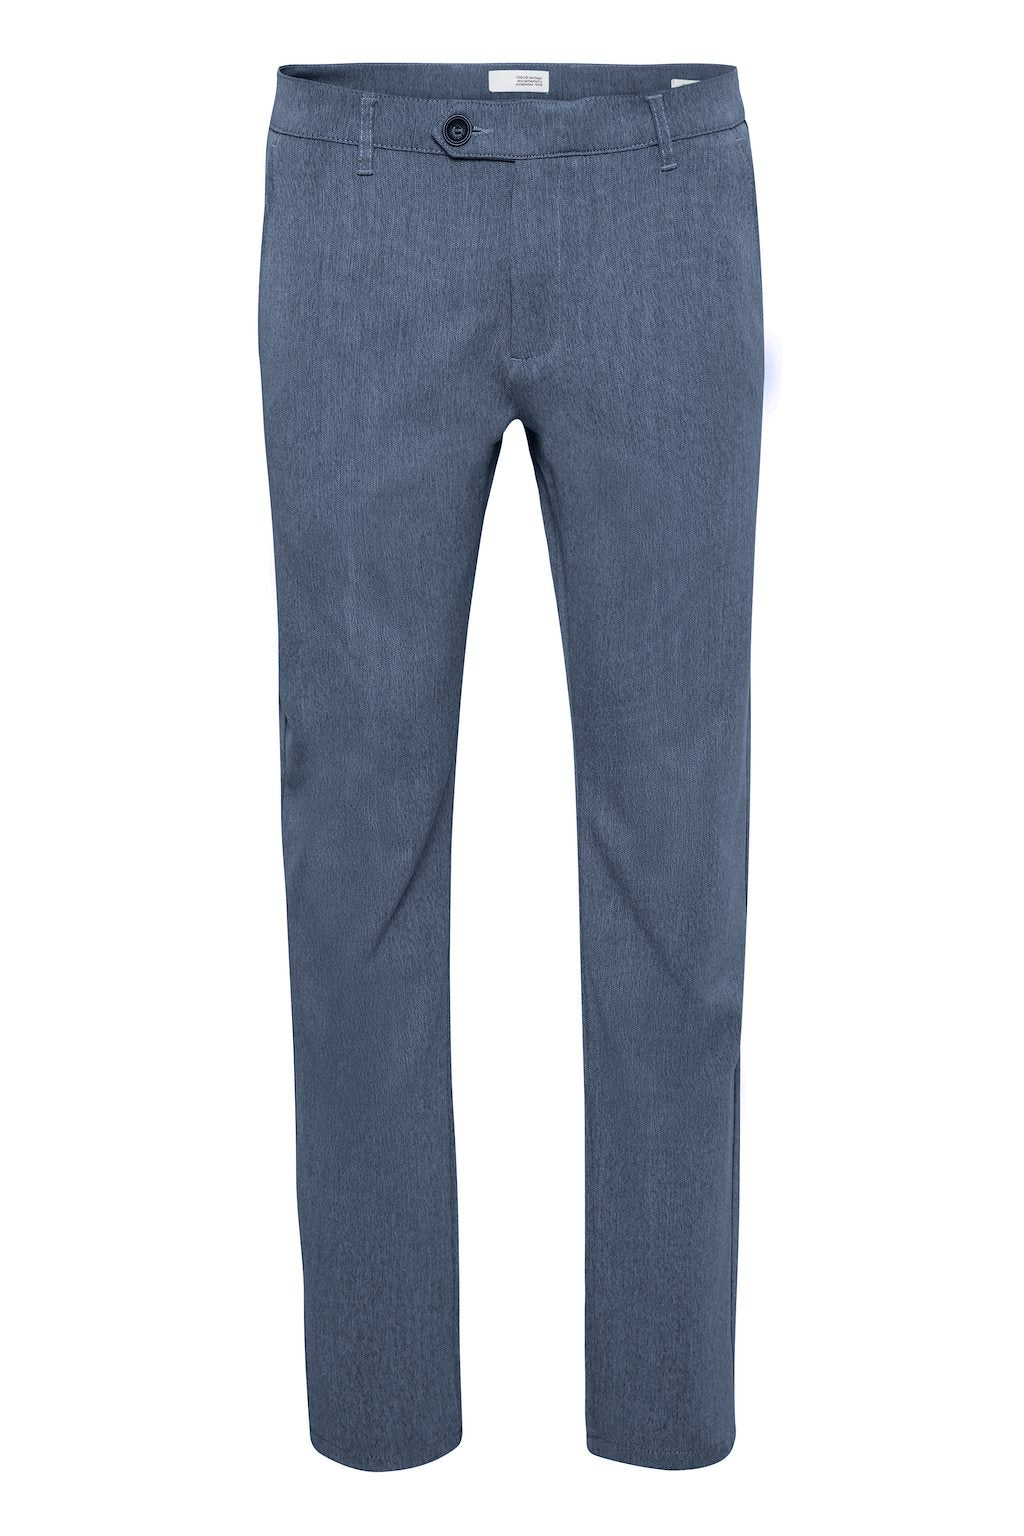 COMFORT PANTS - FRED - OMBRE BLUE